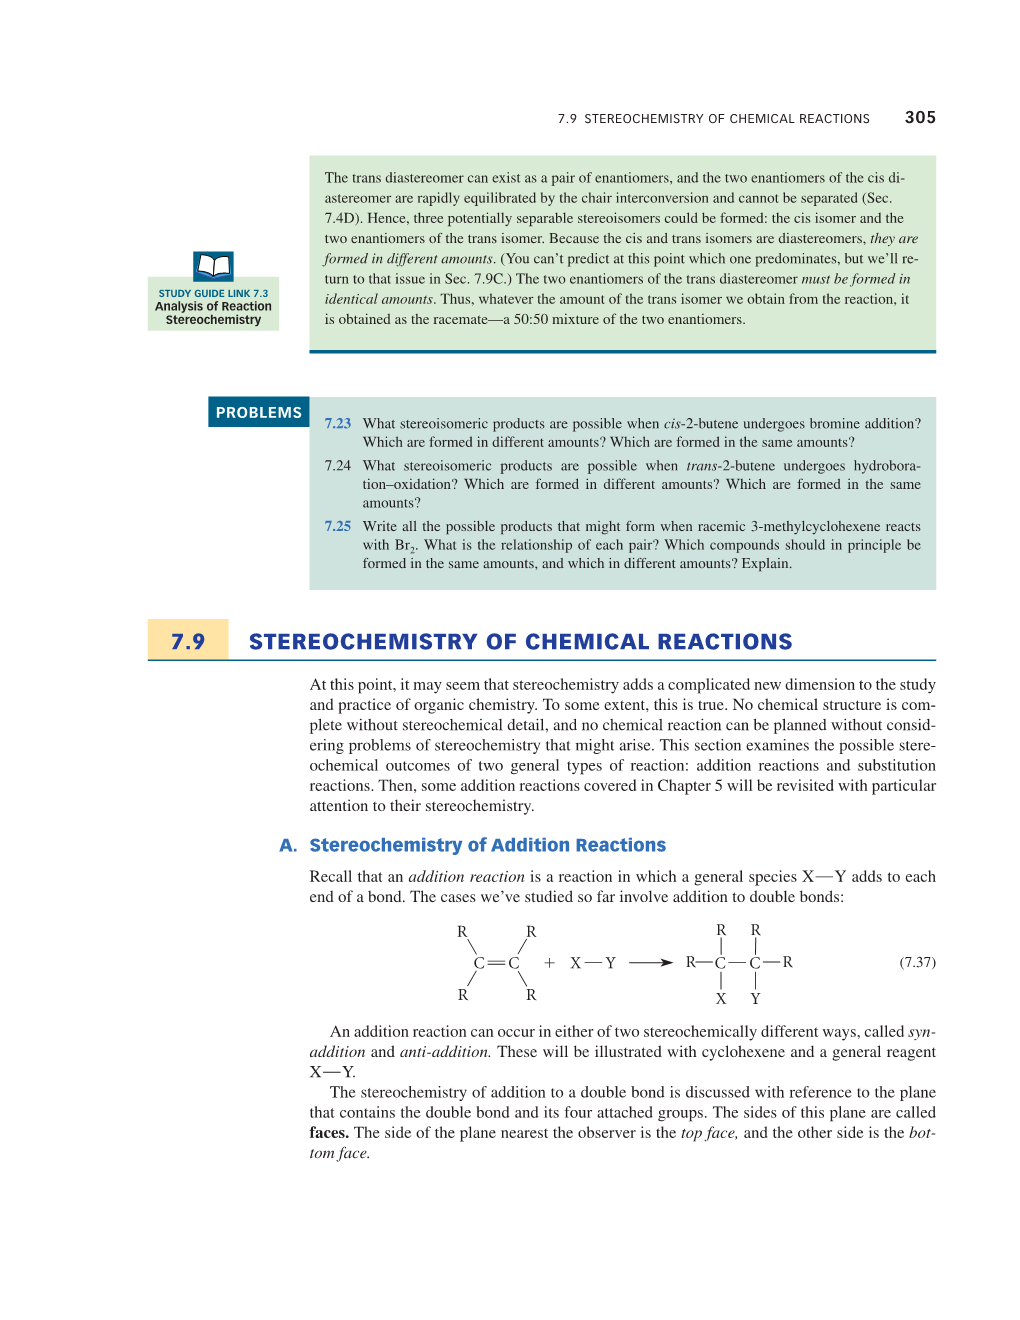 7.9 Stereochemistry of Chemical Reactions 305